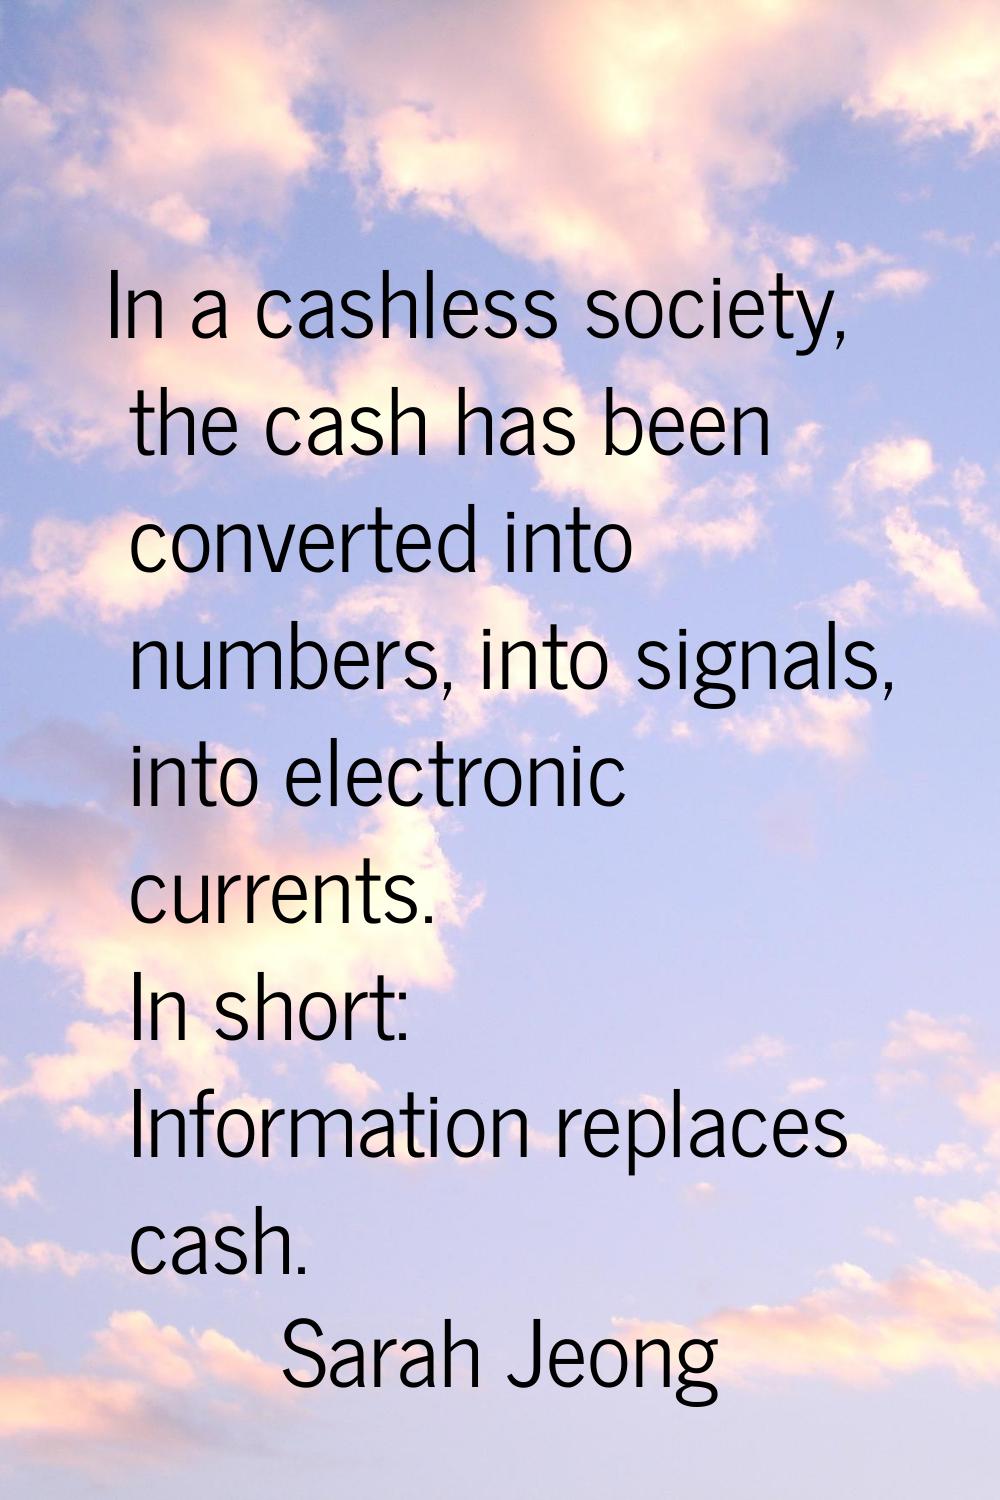 In a cashless society, the cash has been converted into numbers, into signals, into electronic curr